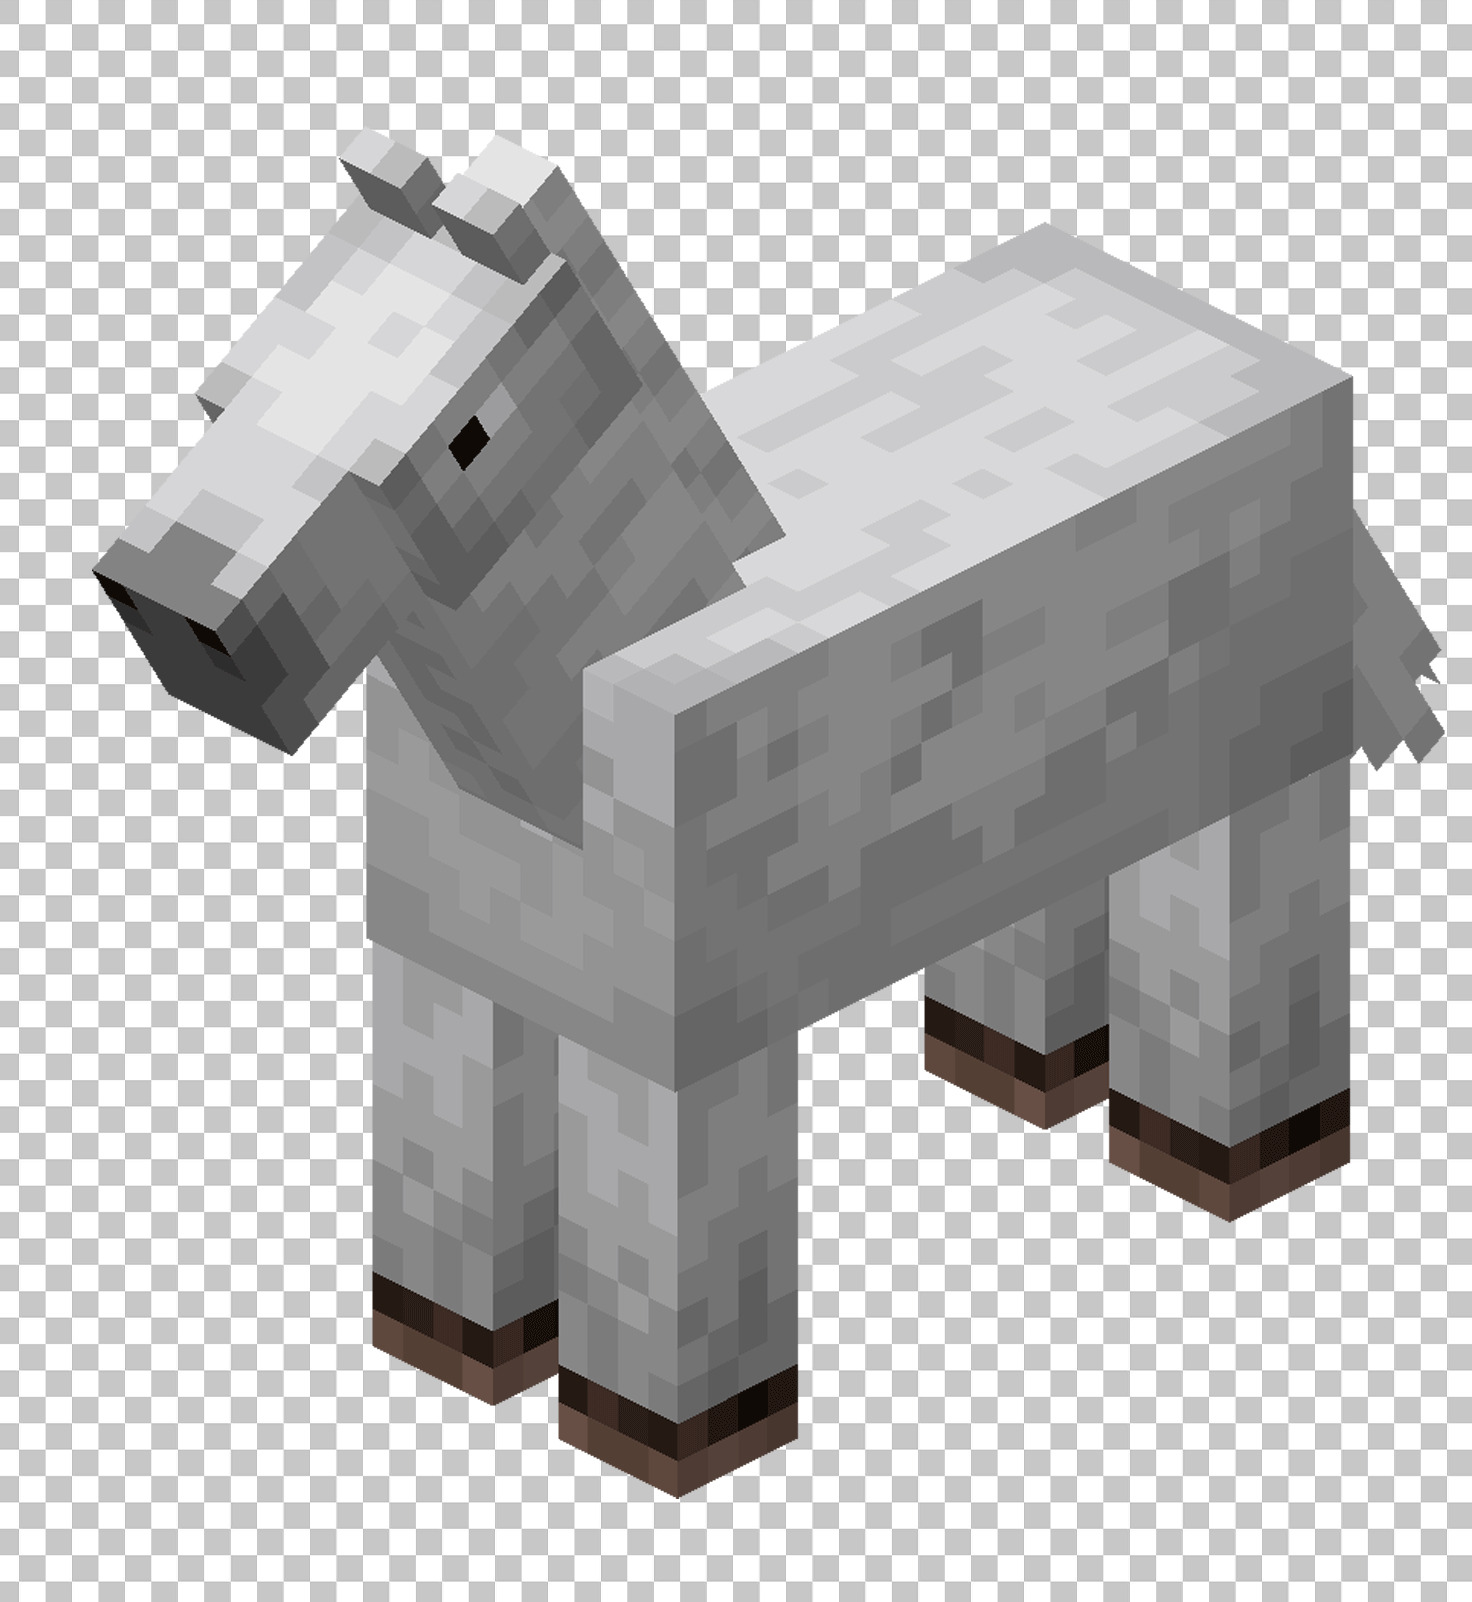 White Minecraft Horse PNG Image